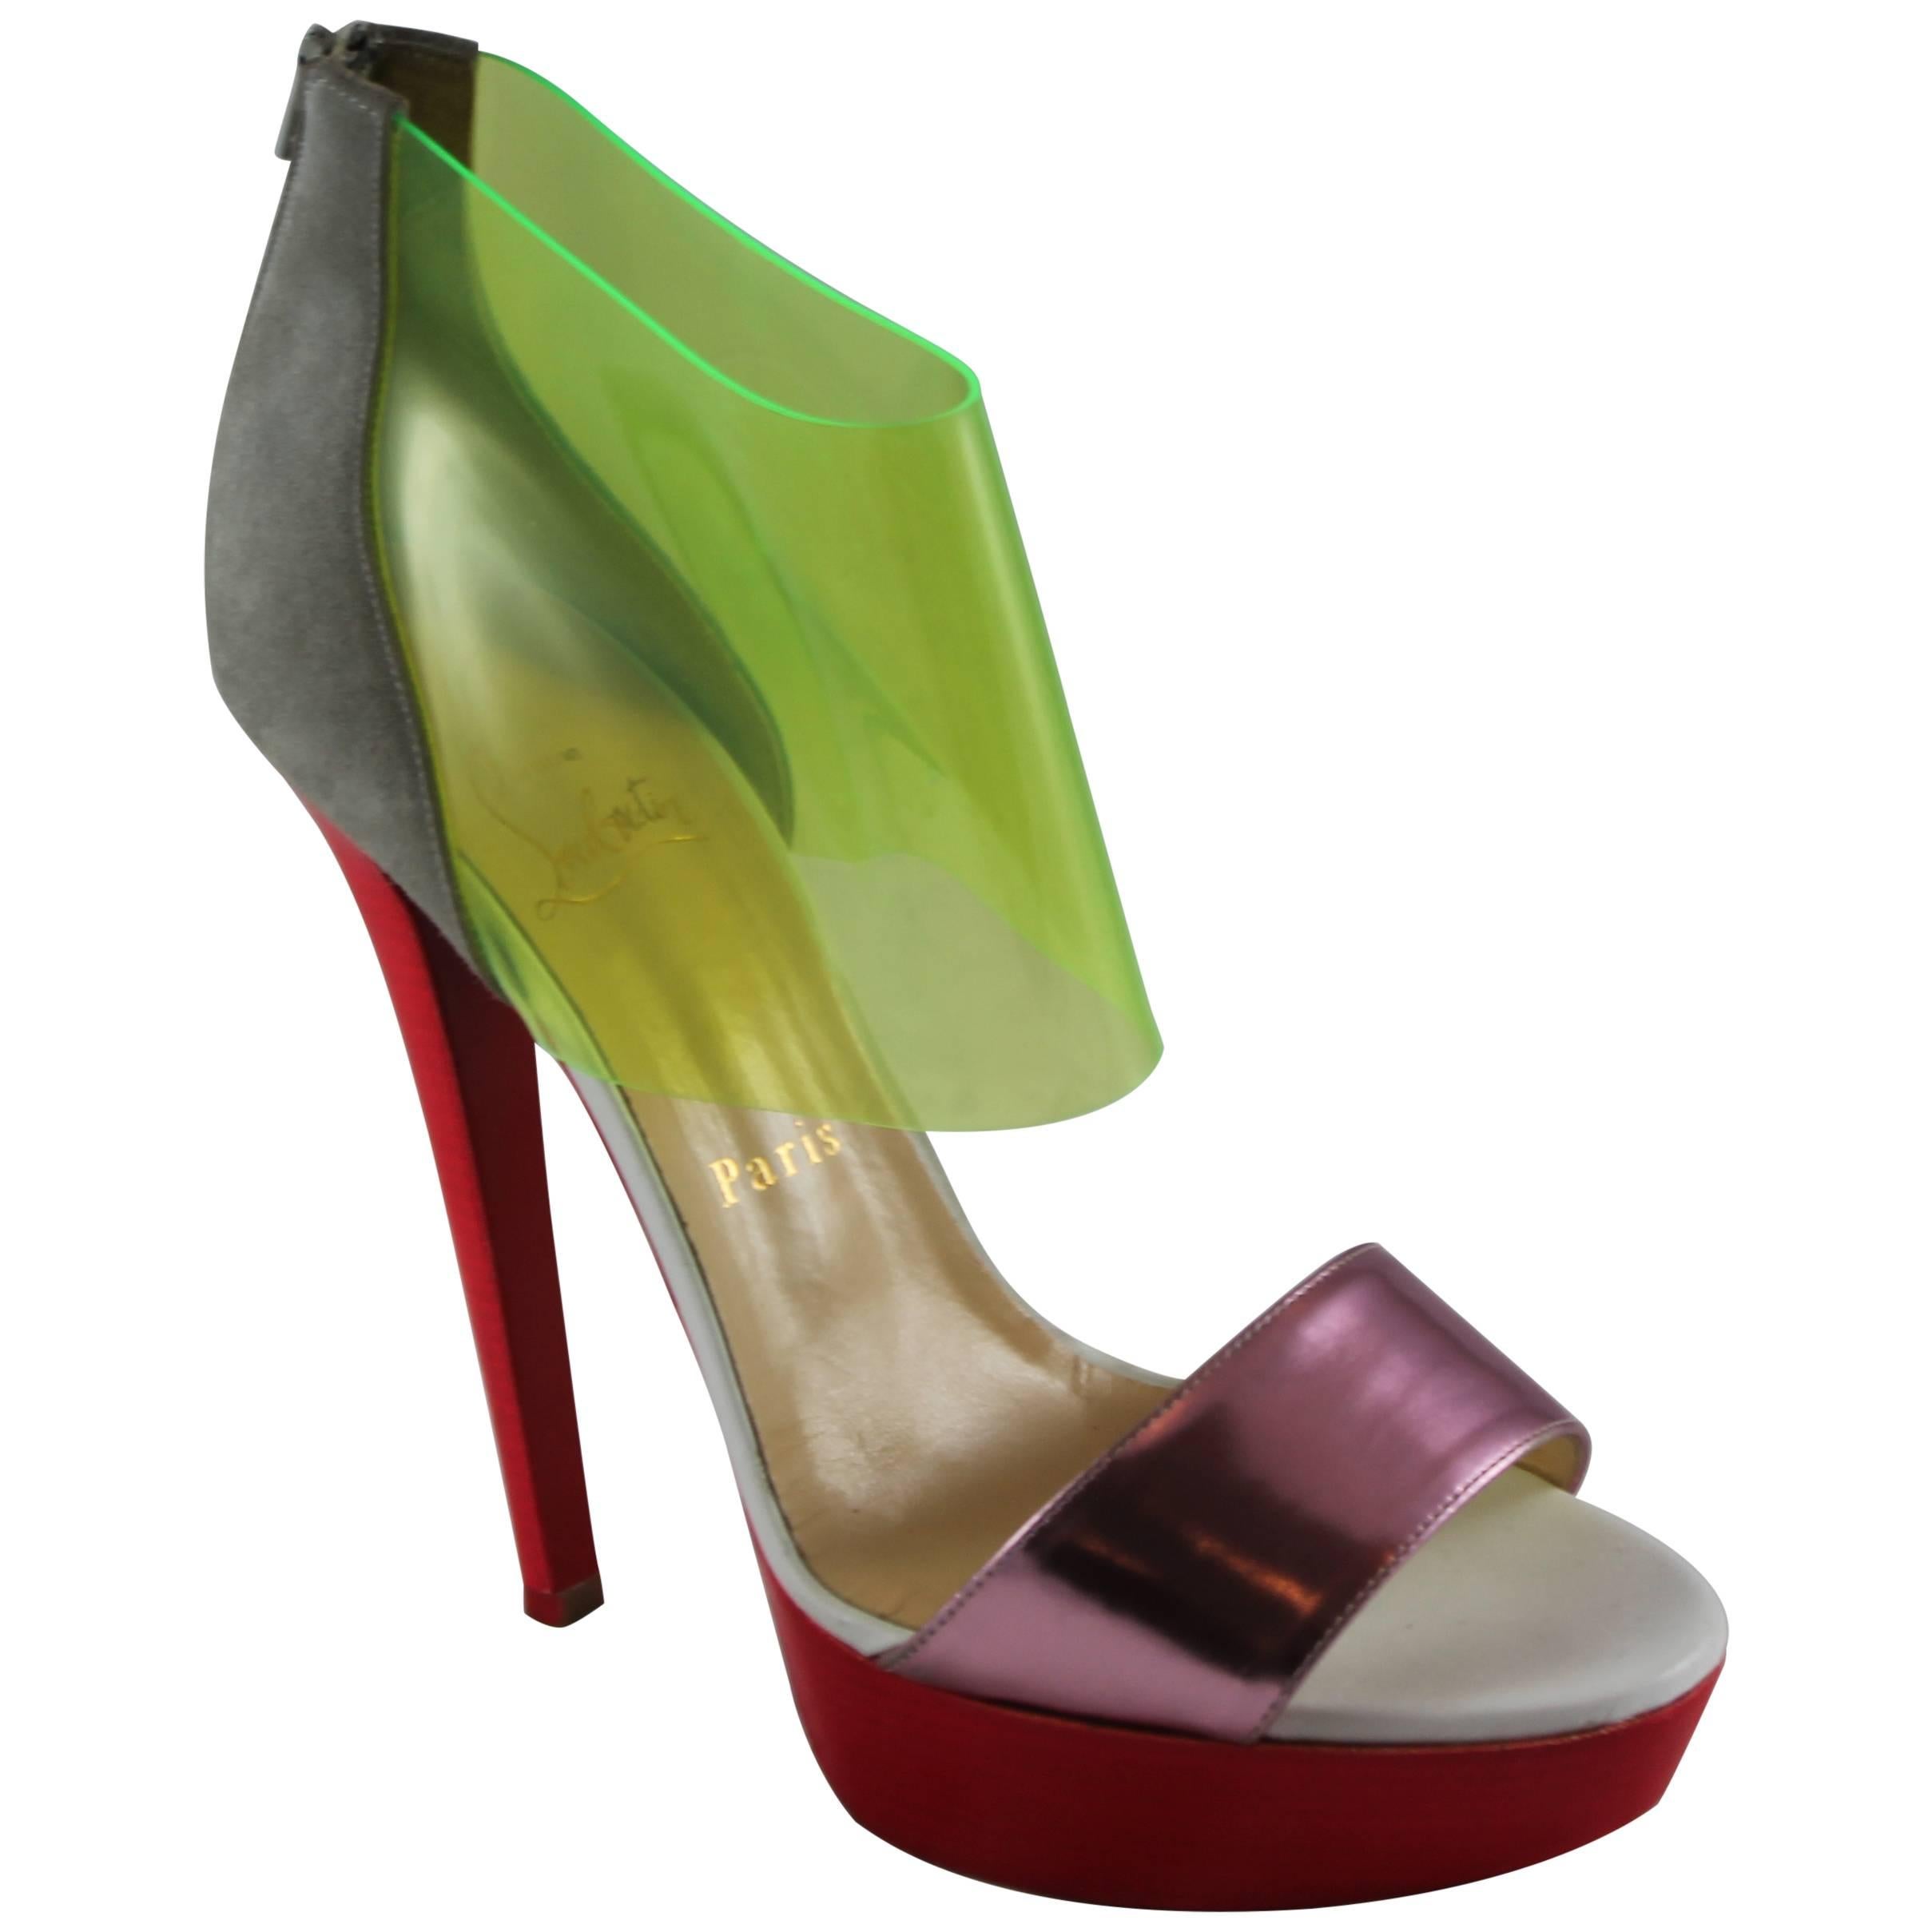 Christian Louboutin Multi Color Suede, Jelly & Leather Cutout Heels - 37.5 